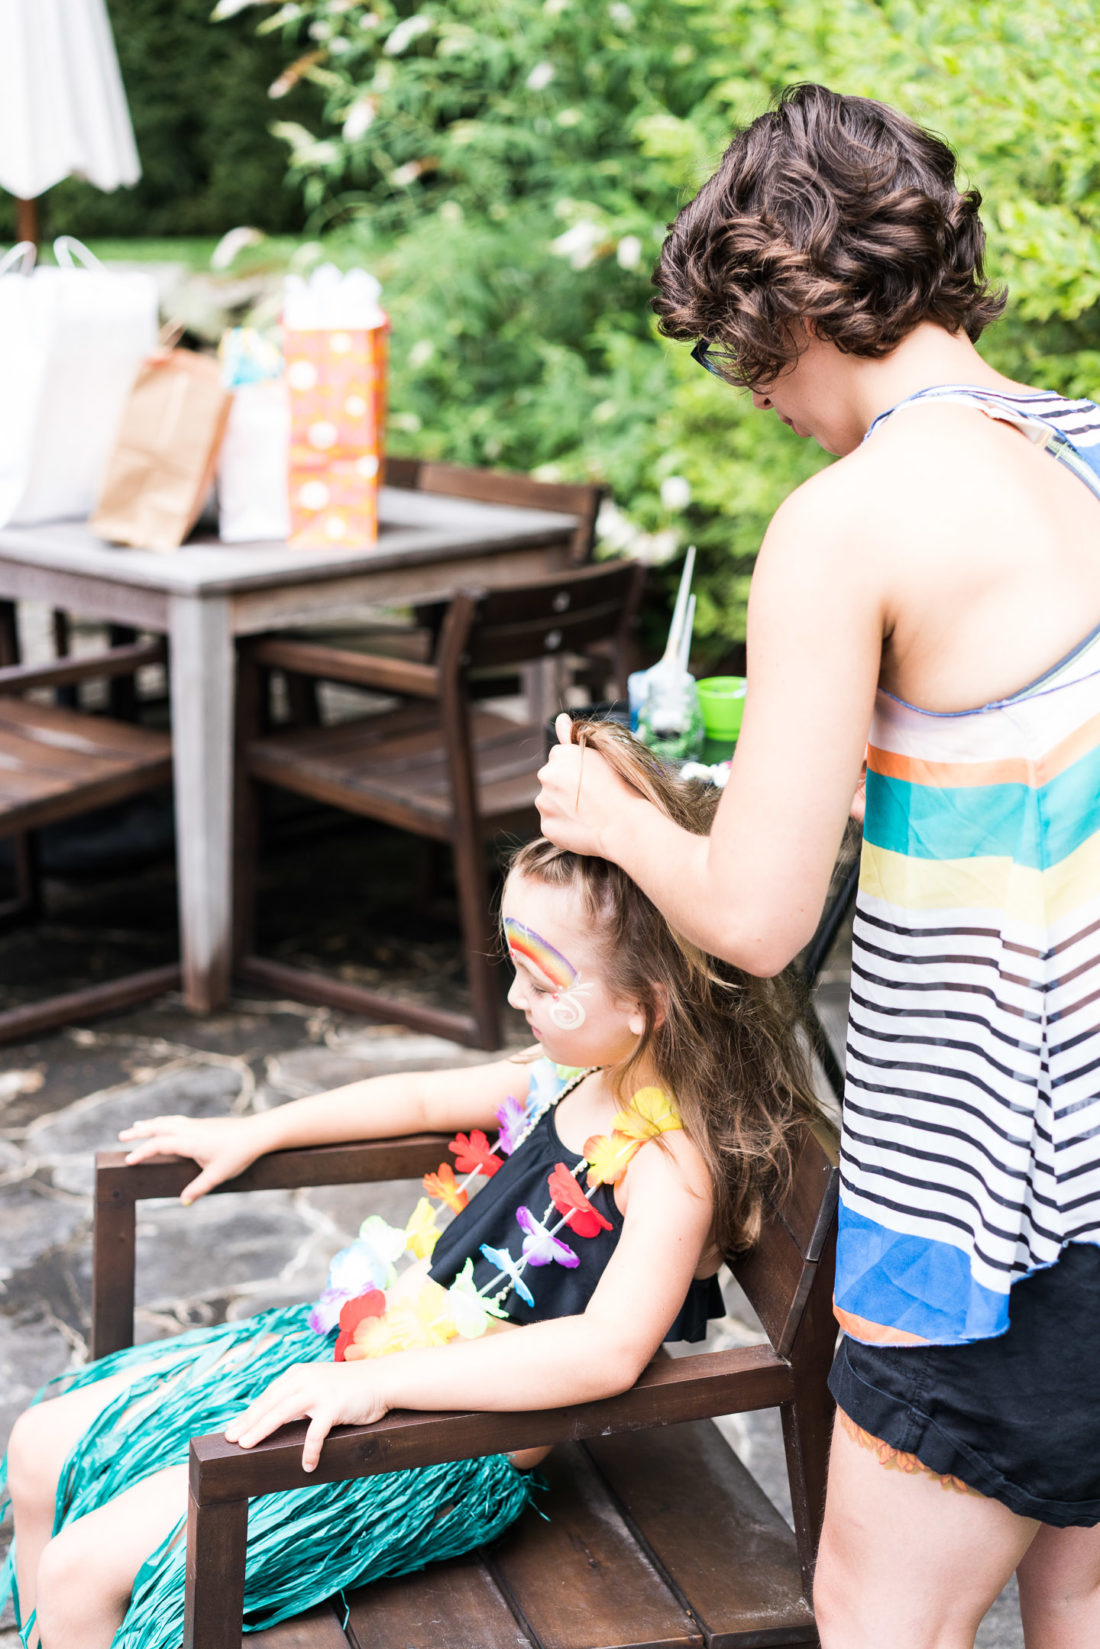 A party guest gets her hair braided at Marlowe Martino's third birthday party